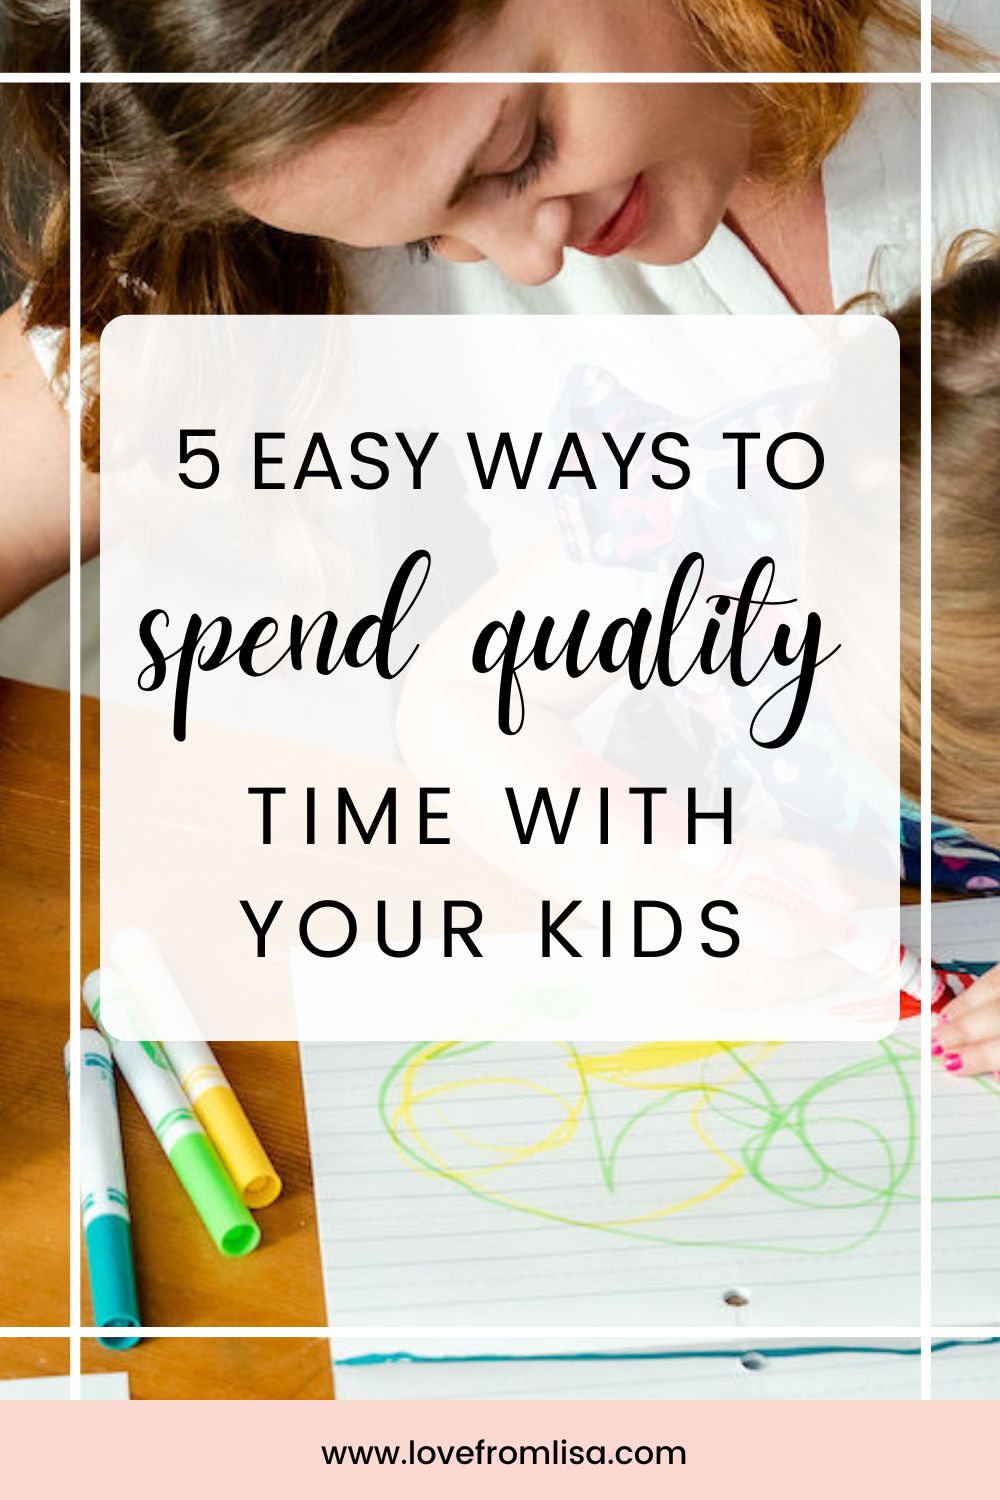 5 easy ways to spend quality time with your kids Pinterest graphic